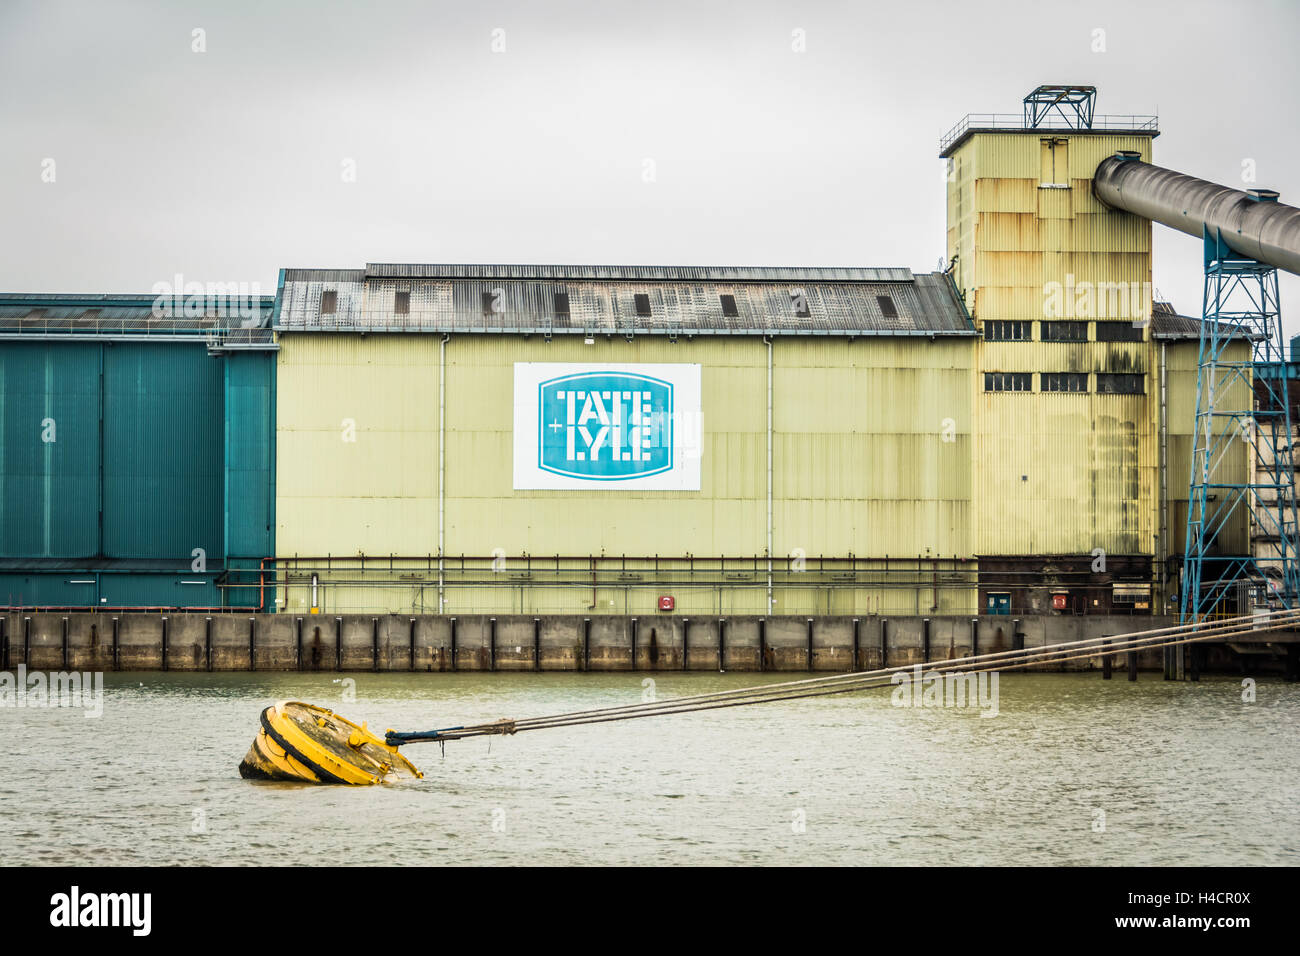 The Tate and Lyle sugar refinery factory in Silvertown near London City Airport, UK Stock Photo